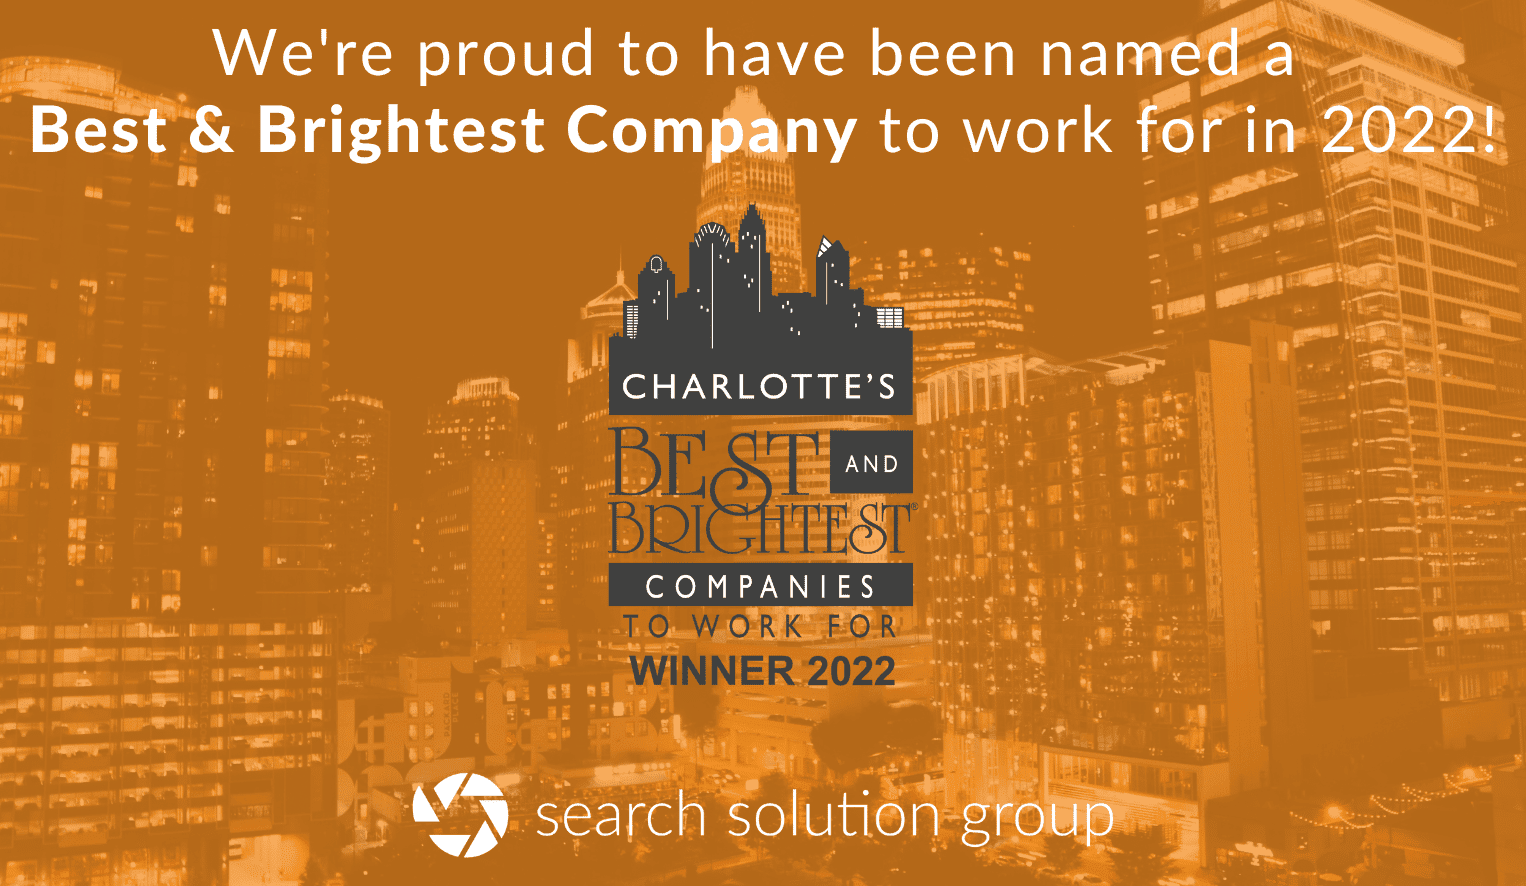 Search Solution Group is a proud winner of the Best and Brightest Companies to Work for in Charlotte, NC, for the second year in a row!